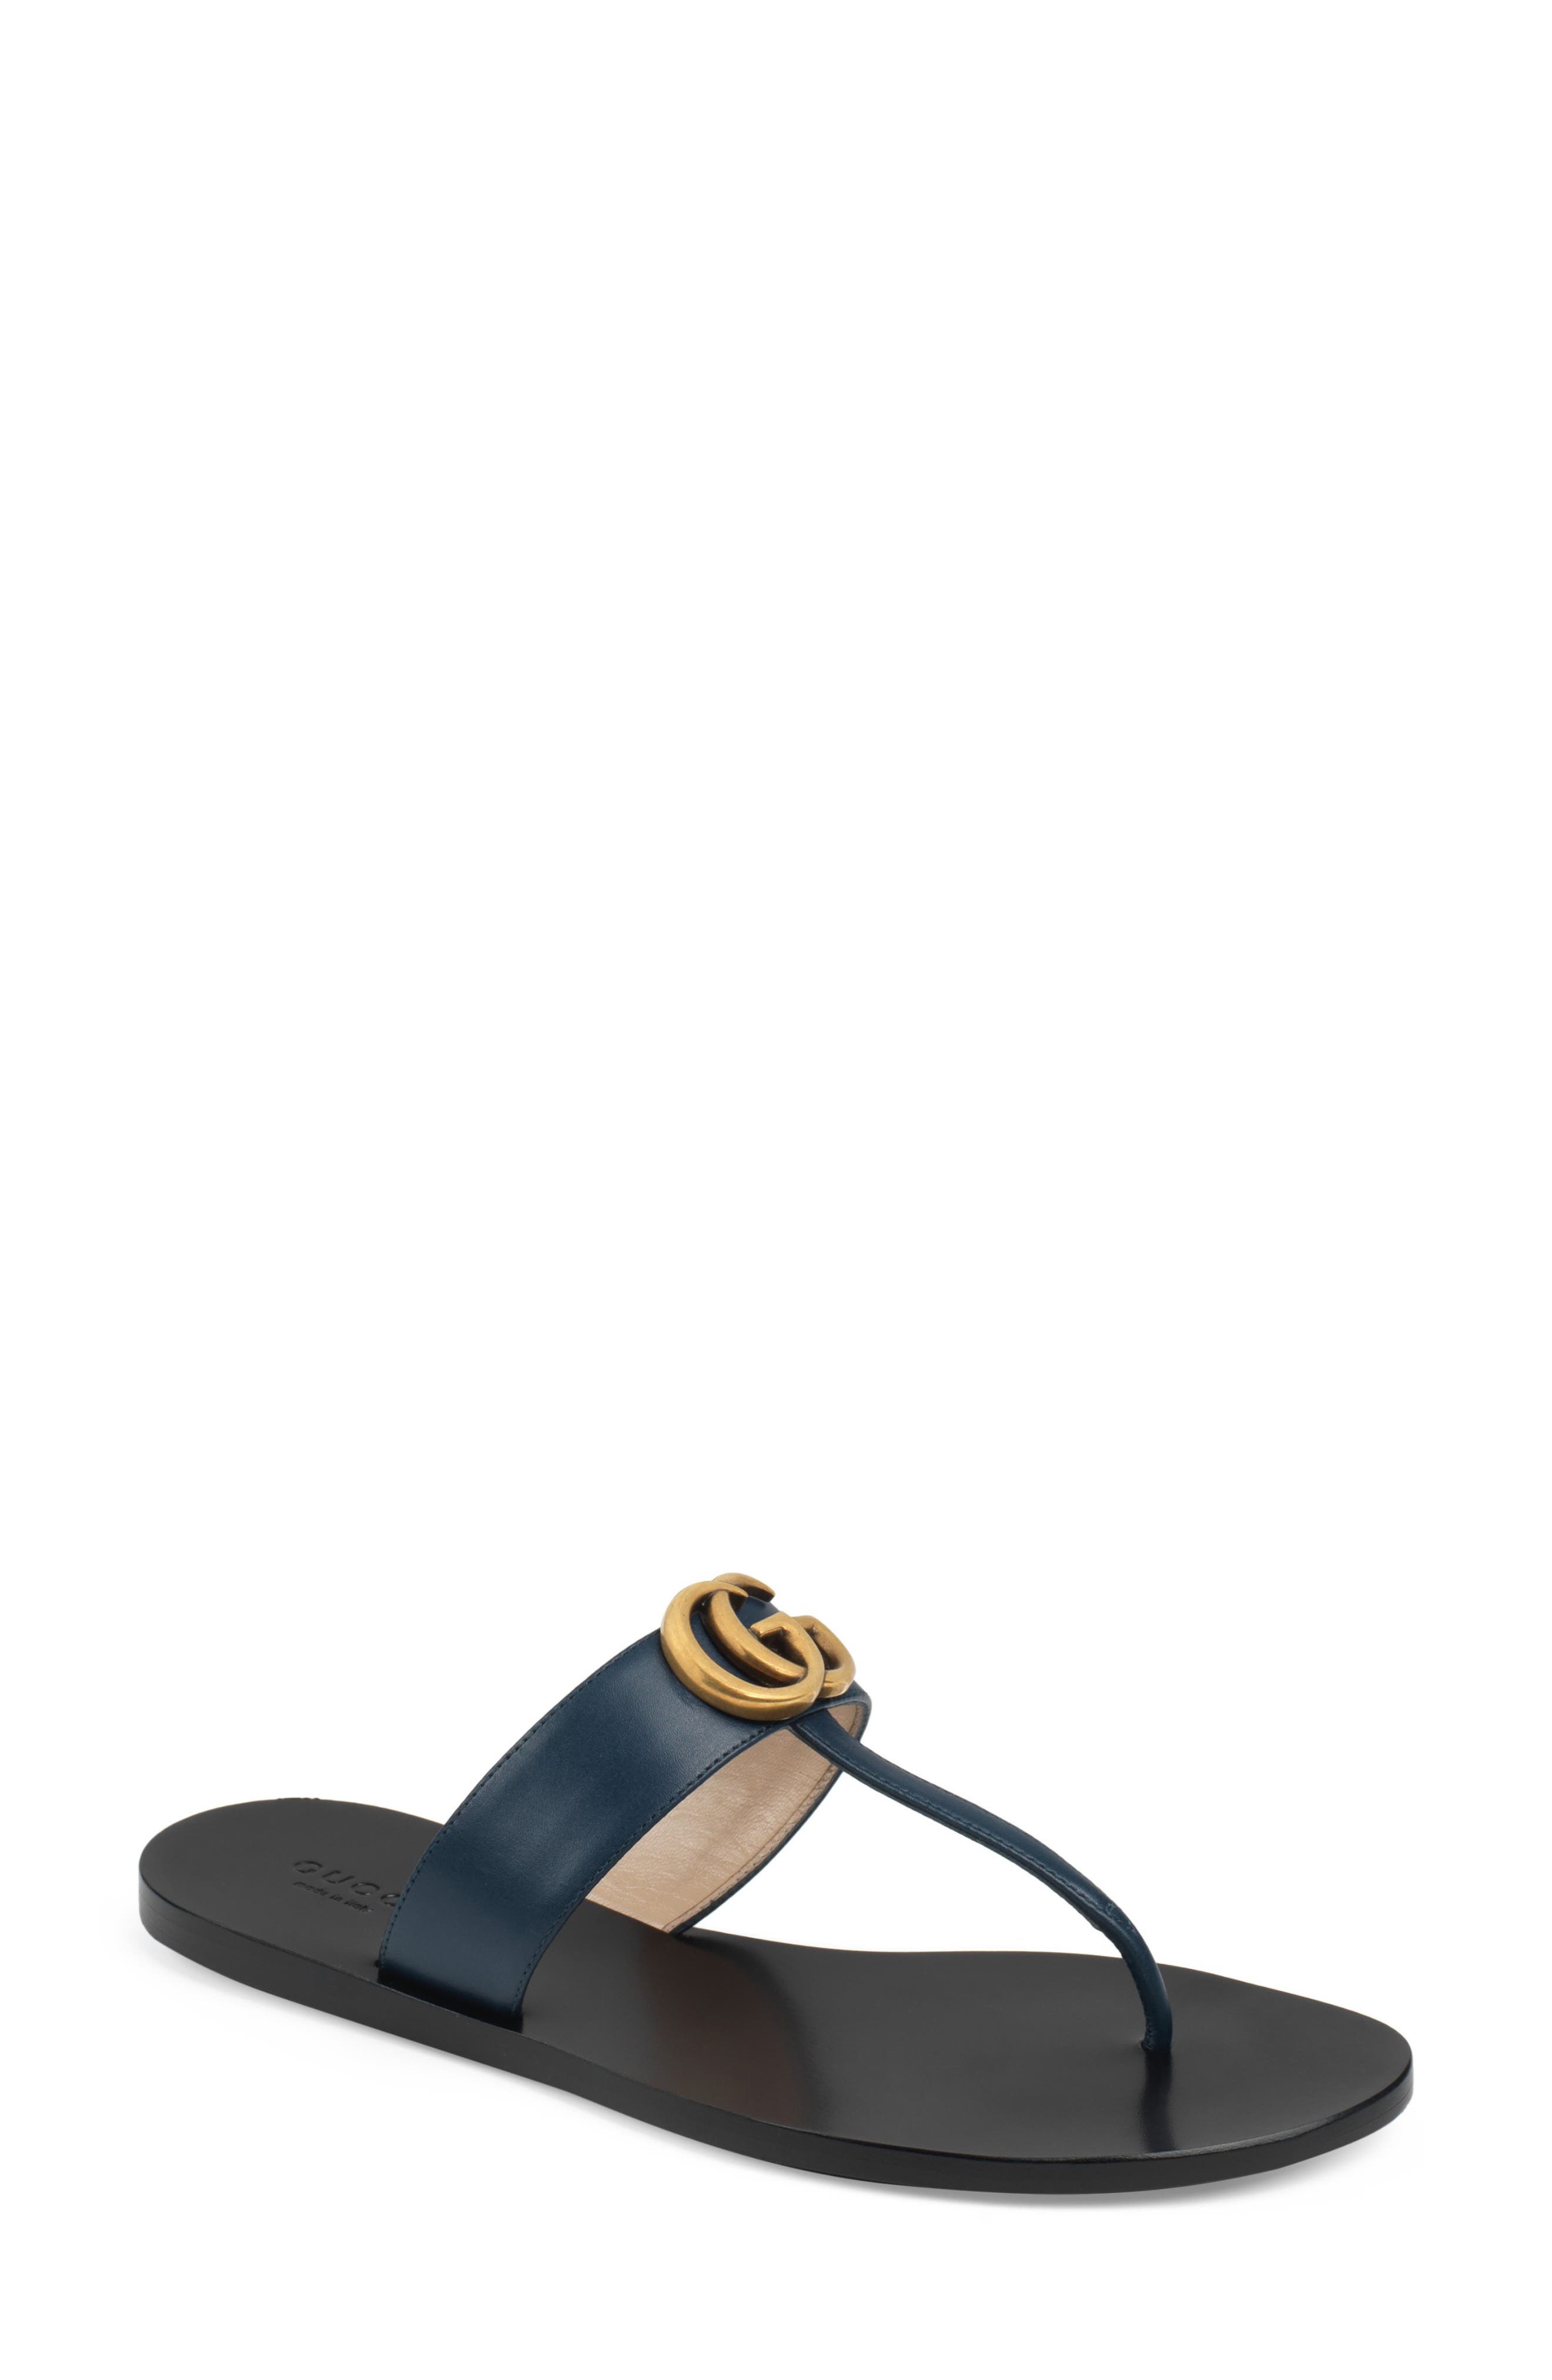 gucci leather thong sandal with double g review